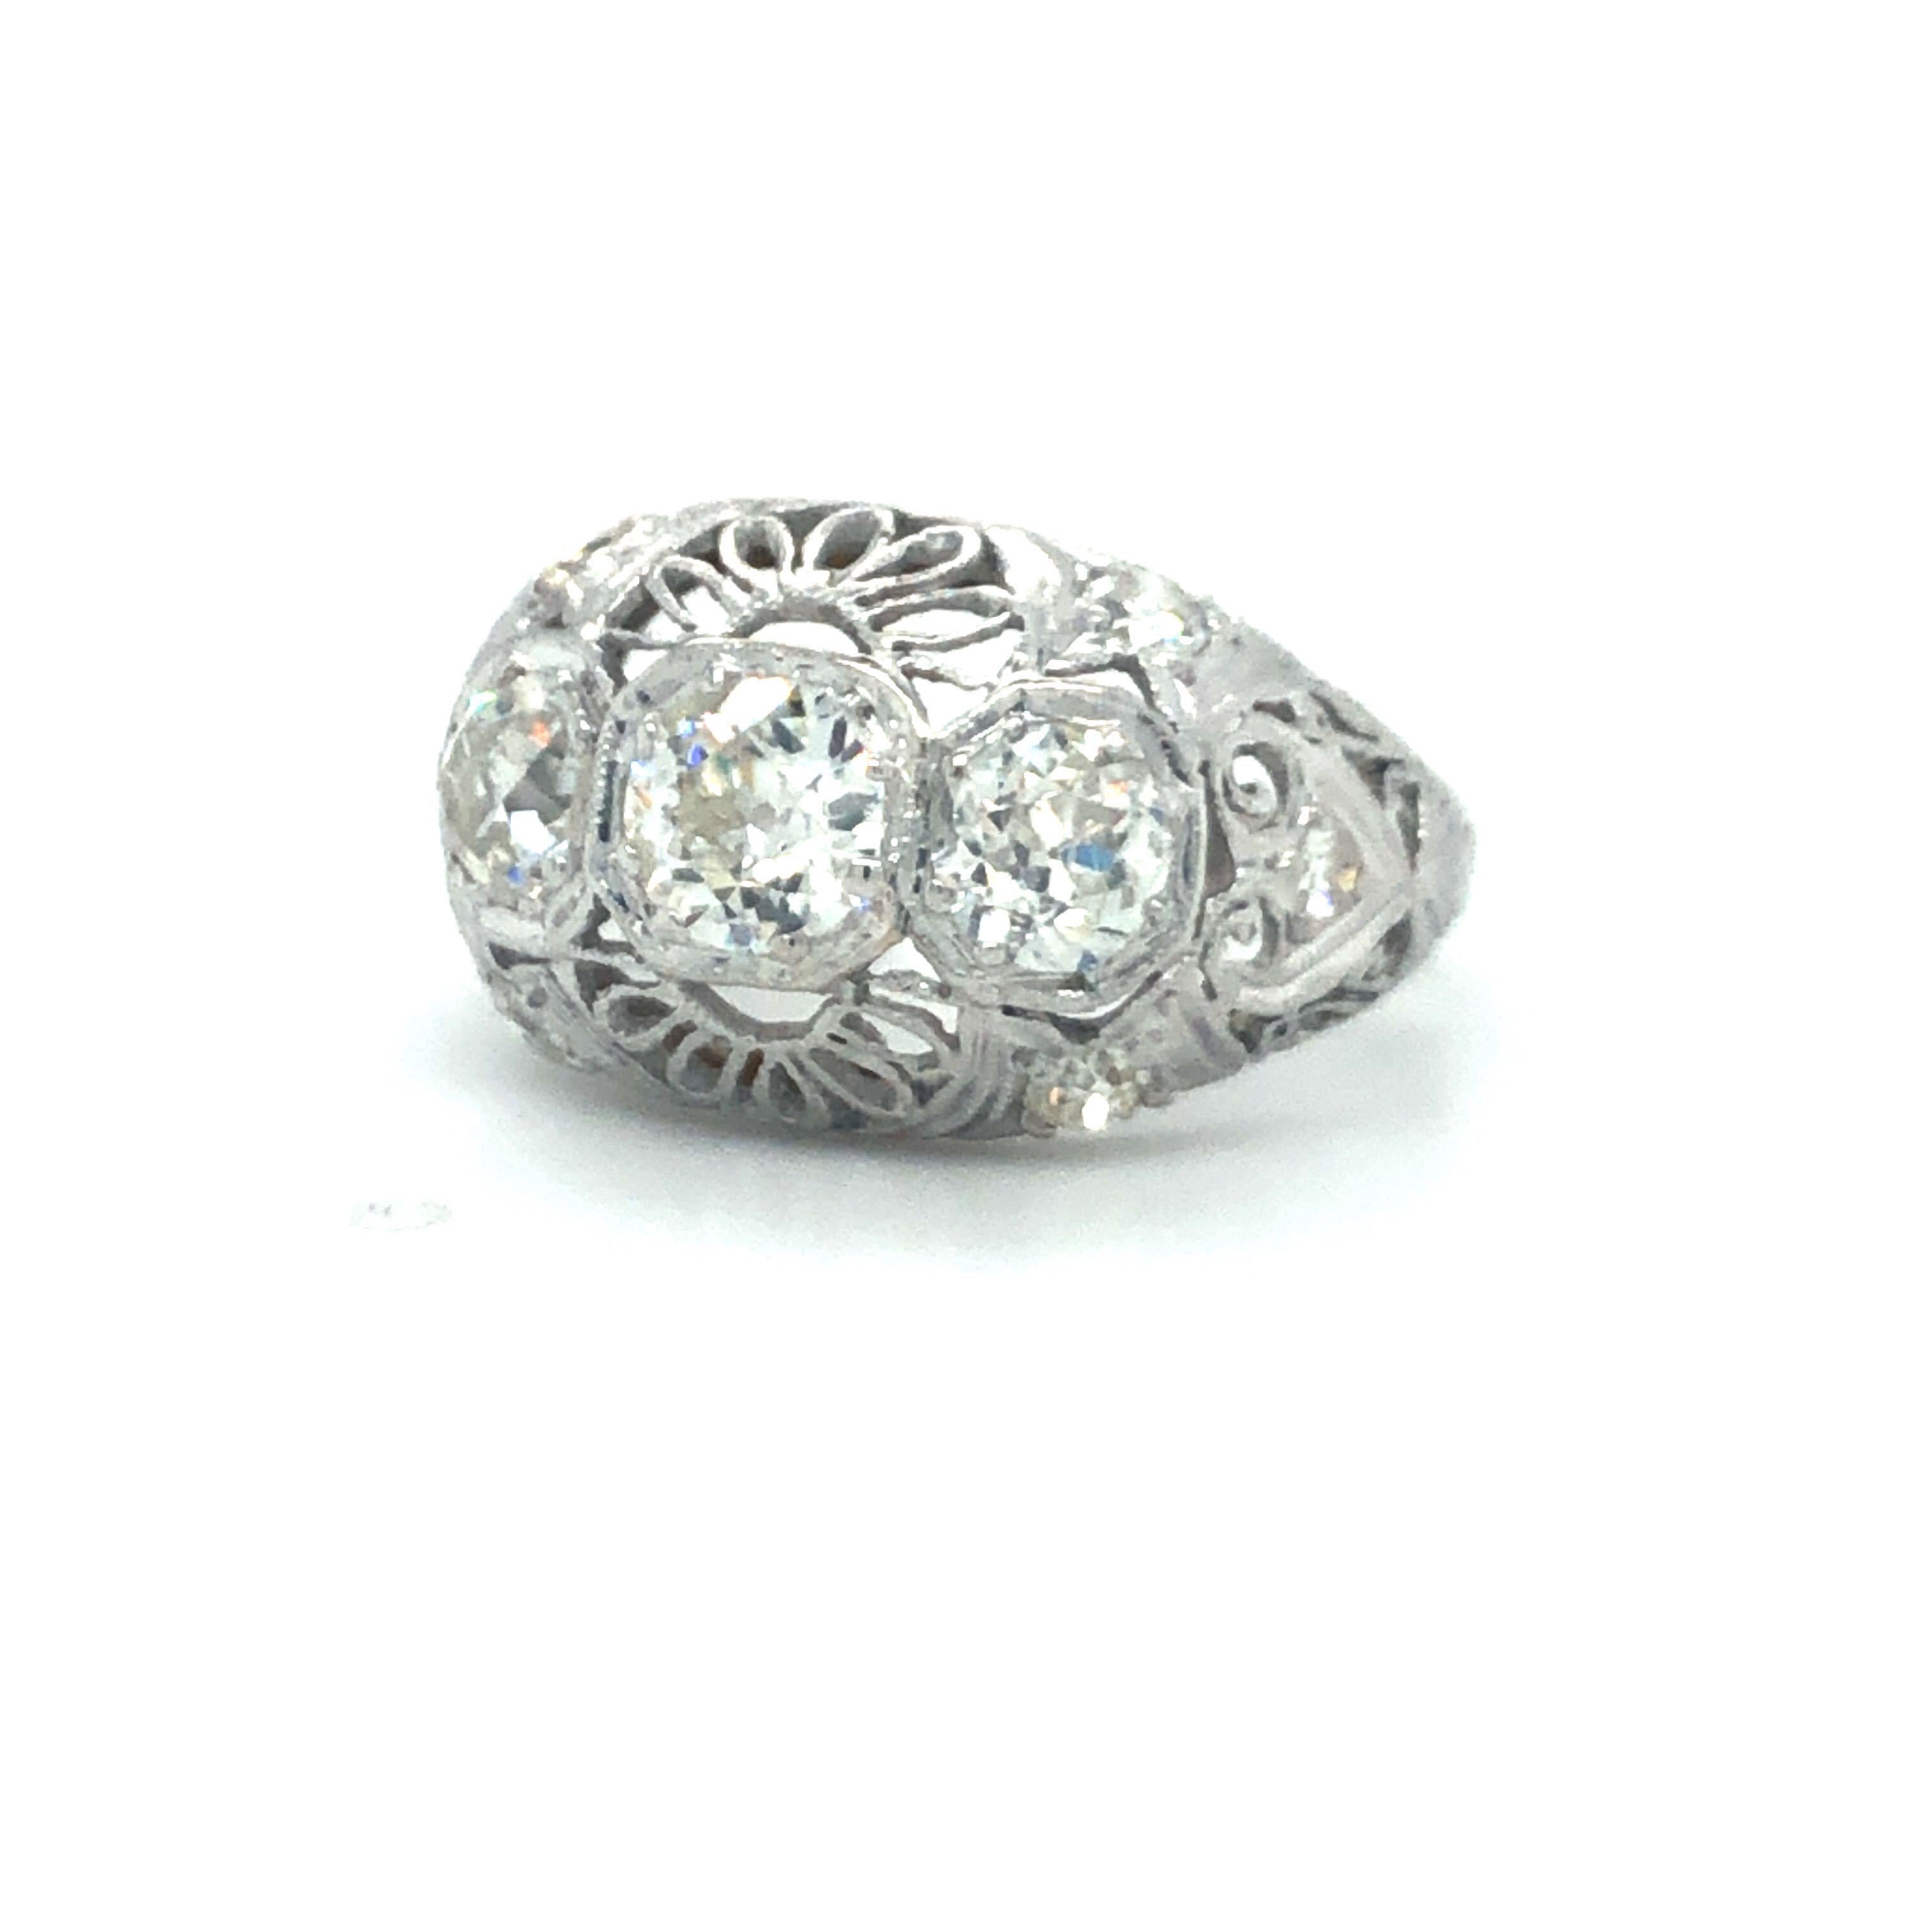 Antique Early 1900's Old Cut Diamond Three Stone Filigree Ring Platinum

Condition:  Excellent Condition, Professionally Cleaned and Polished
Metal:  Platinum (Marked, and Professionally Tested)
Diamonds:  Three Old Cut Diamonds 1.25ctw
Diamond